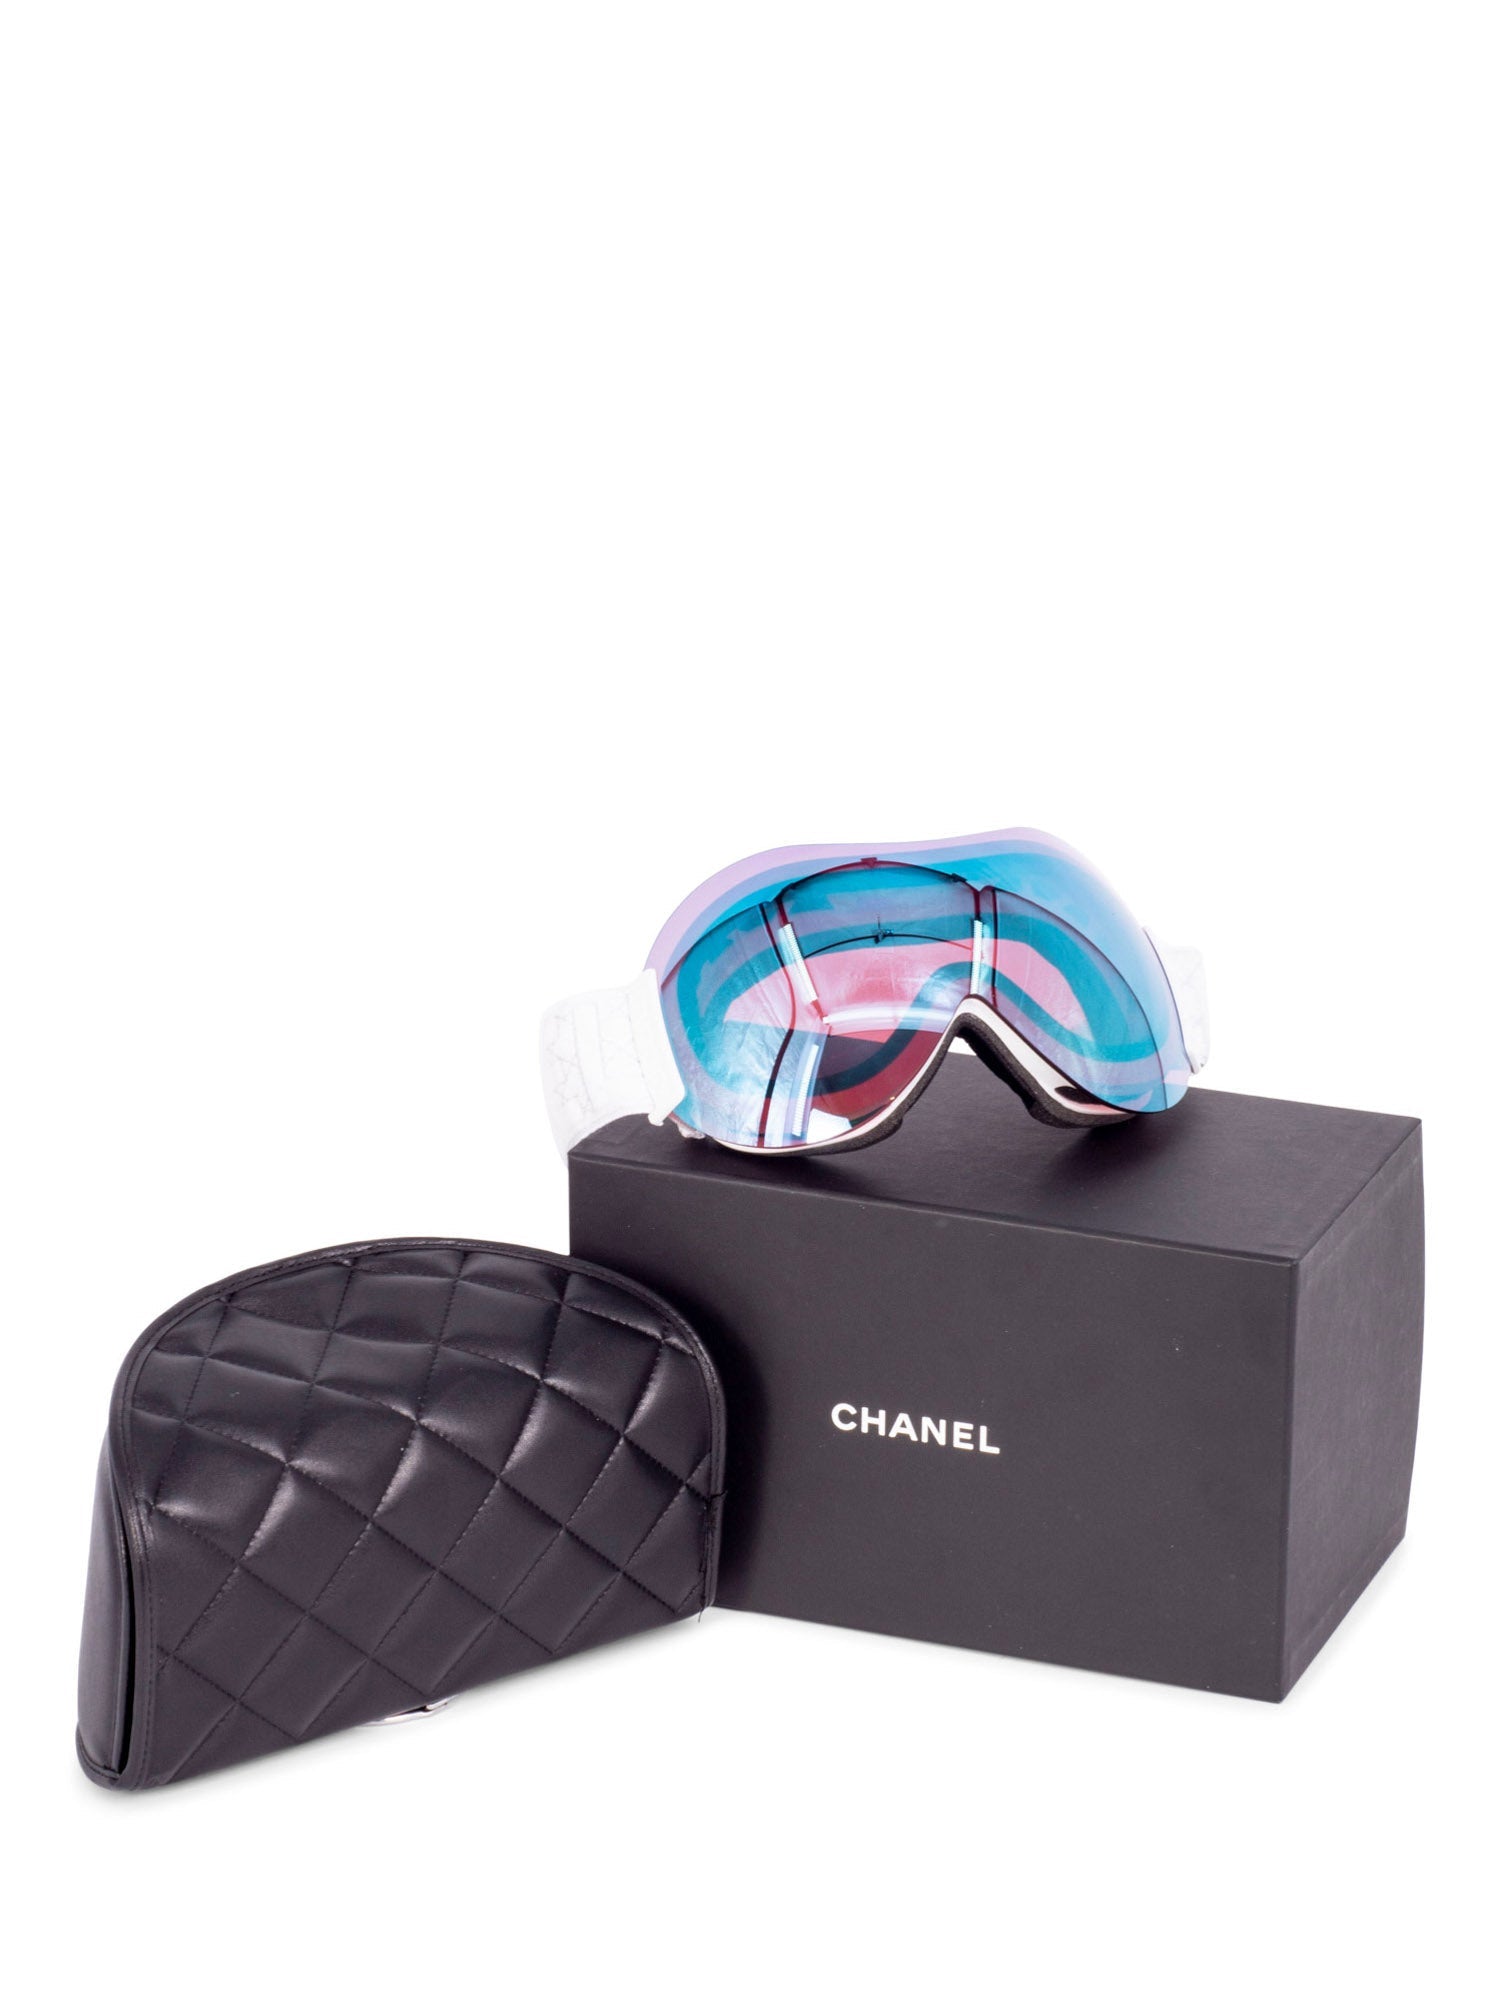 CHANEL CC Logo Ski Goggles with Quilted Leather Clutch Black-designer resale